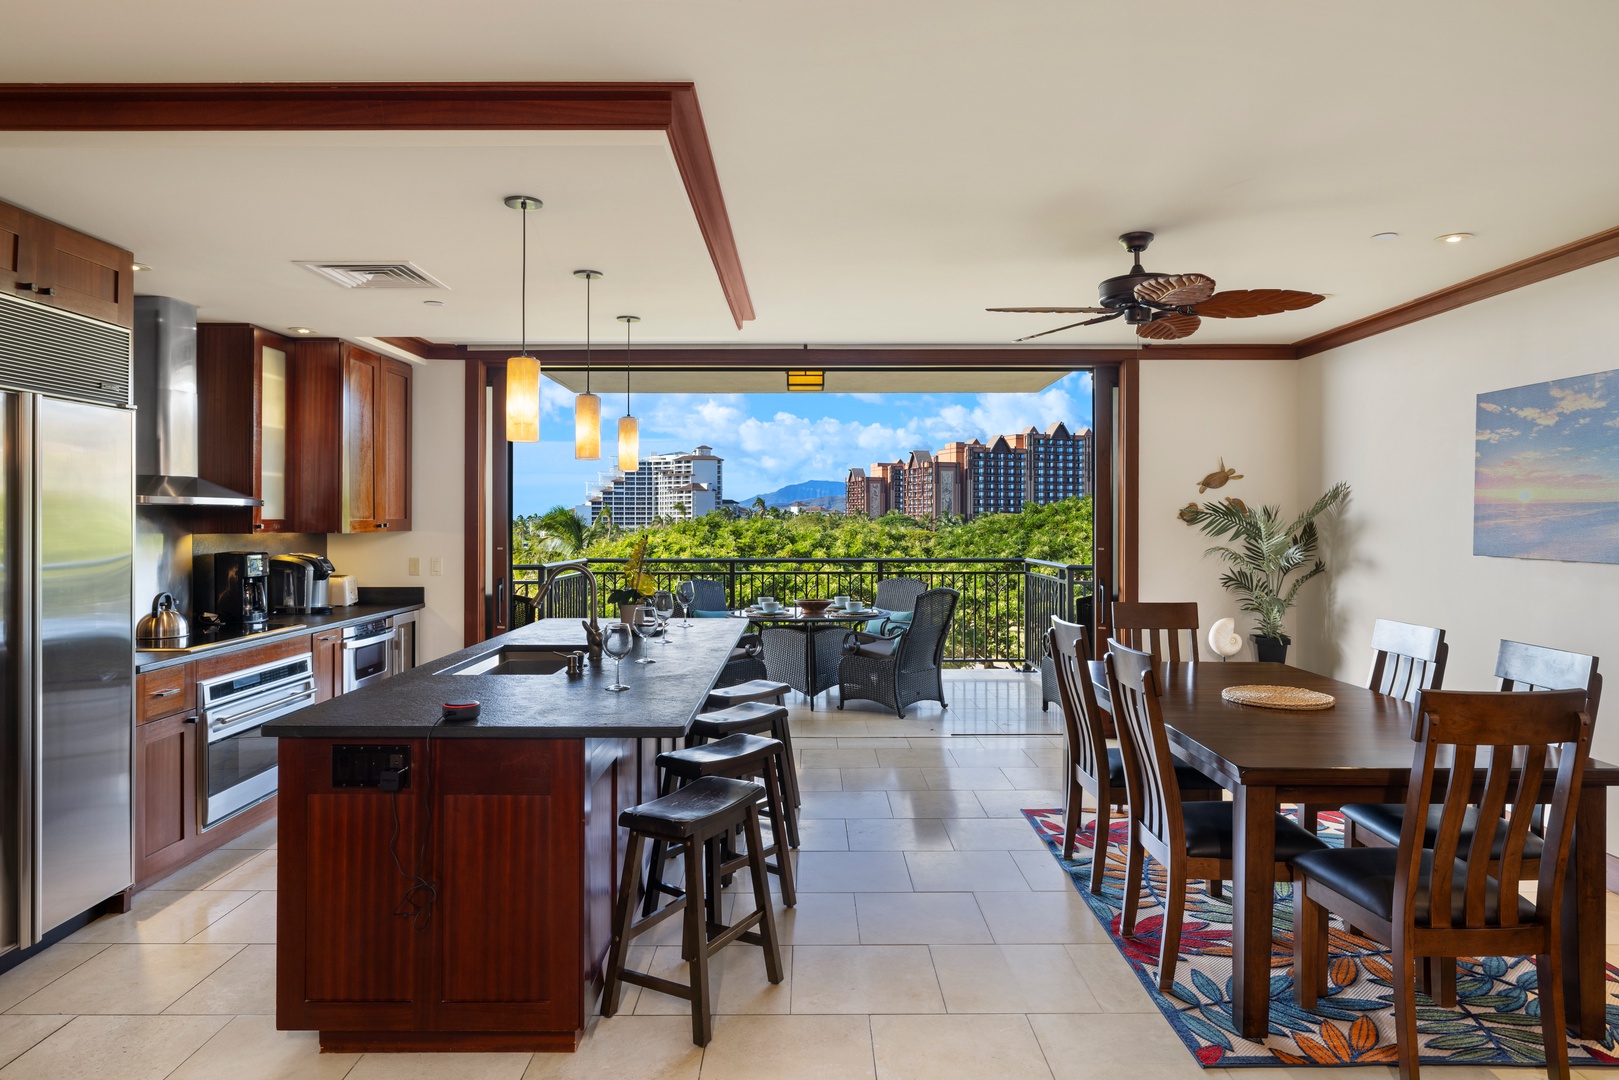 Kapolei Vacation Rentals, Ko Olina Beach Villas B506 - A bright open floor plan for seamless flow and connection.